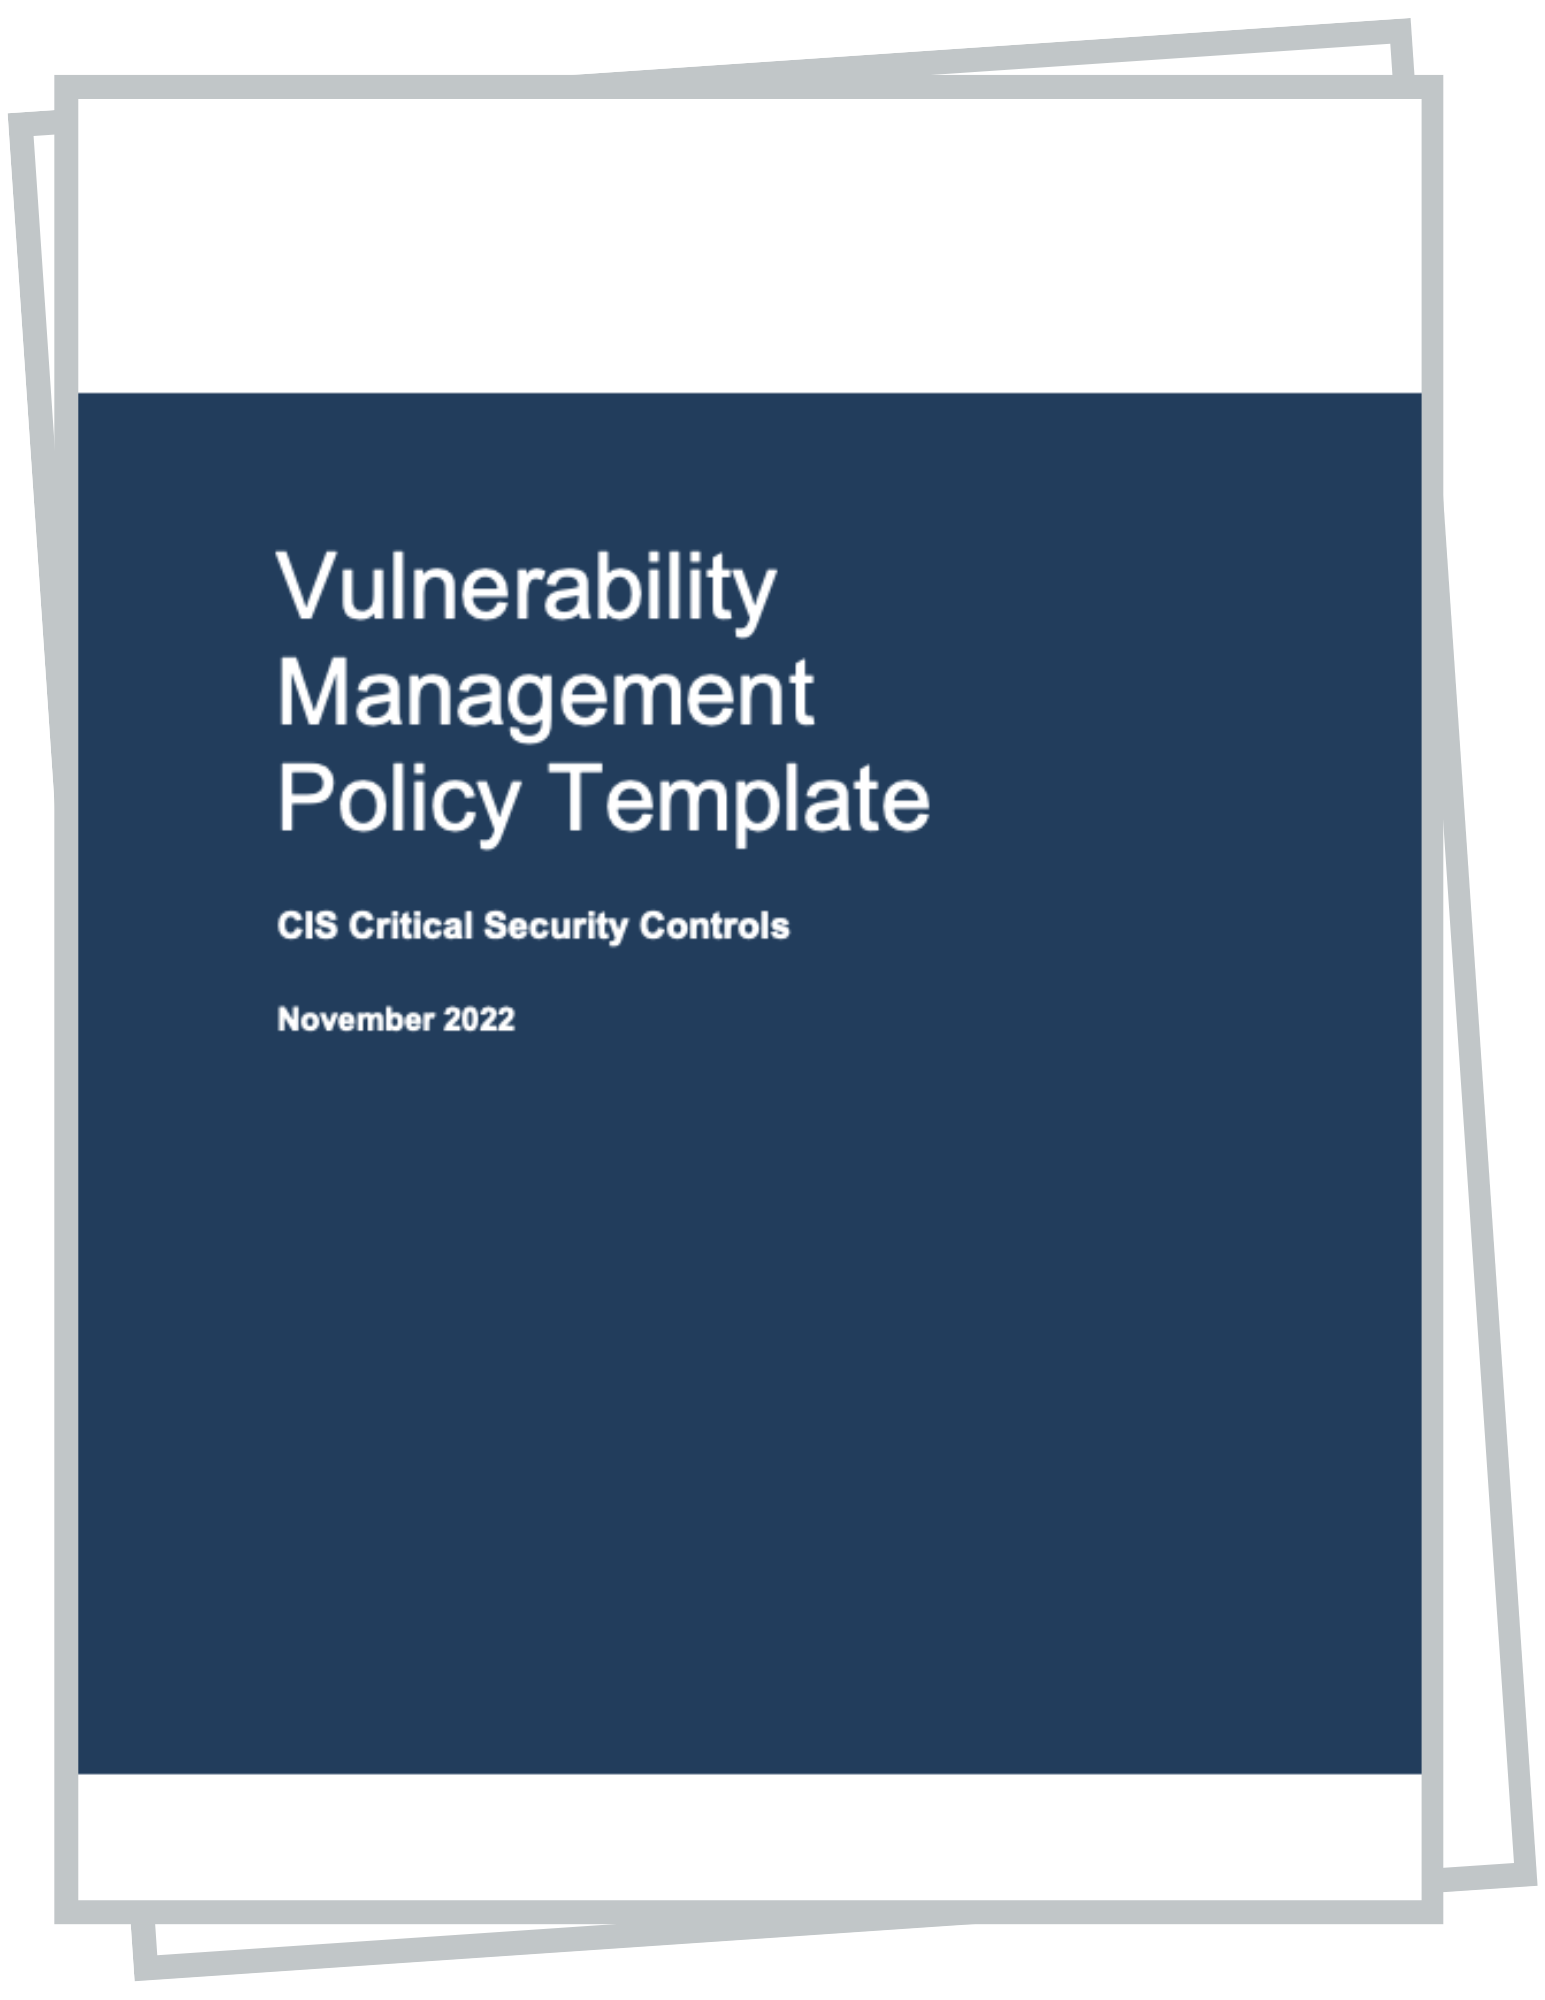 Vulnerability Management Policy Template for CIS Control 7 image